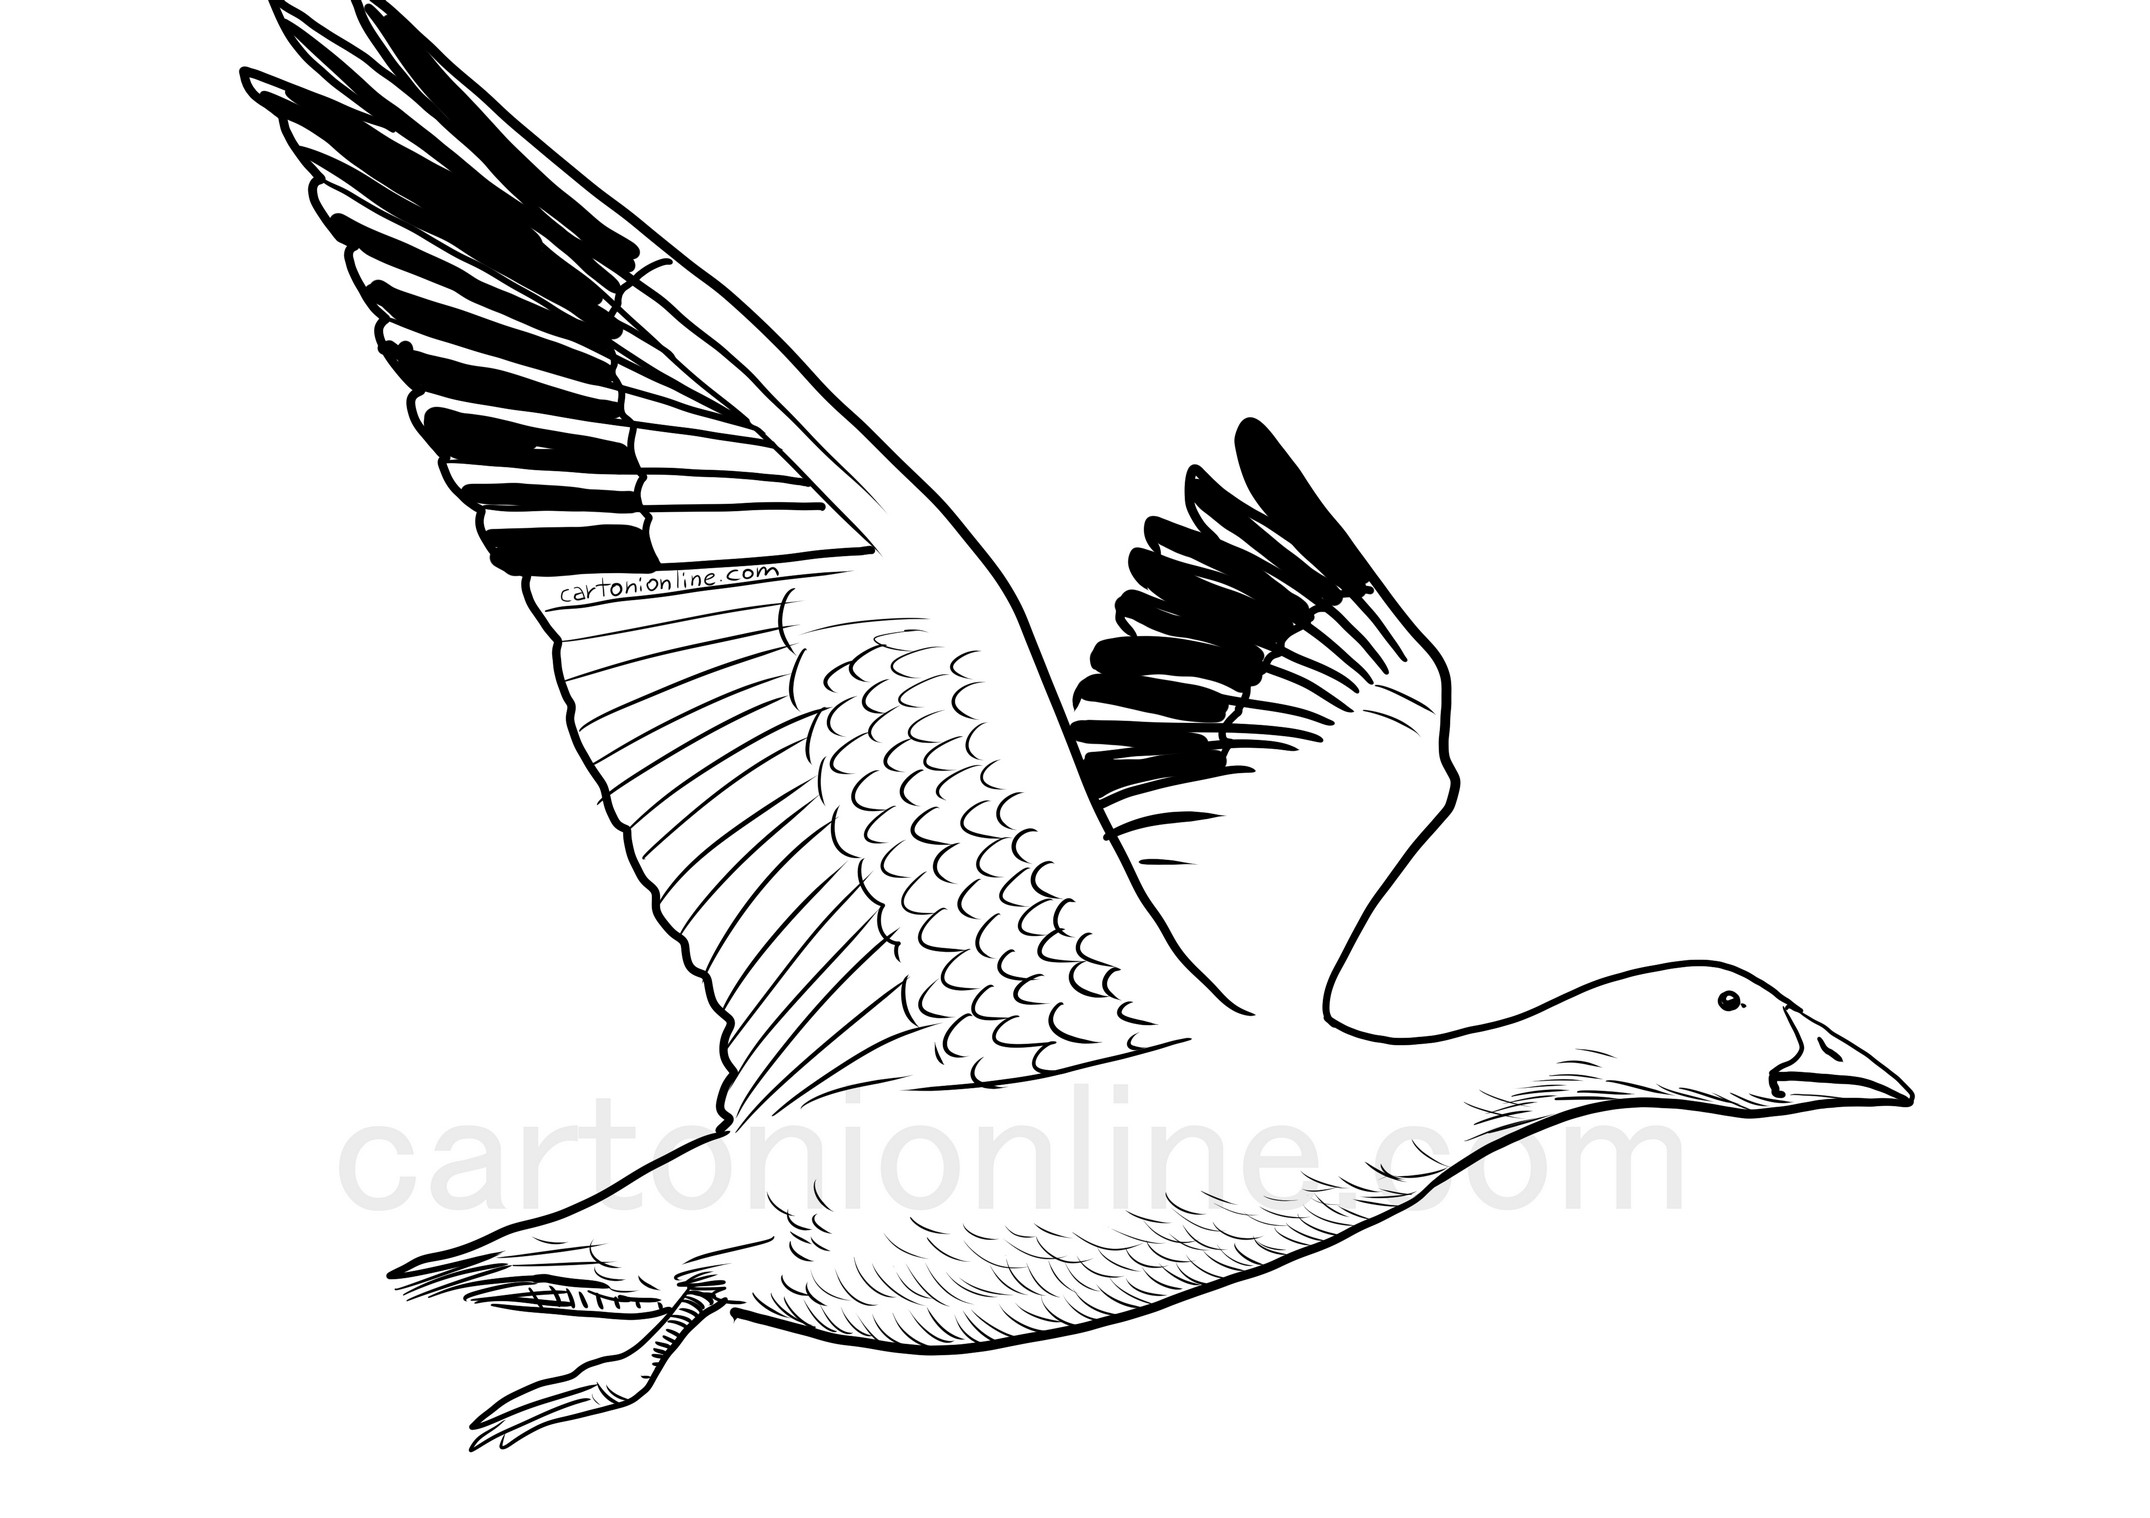 Goose in flight coloring page